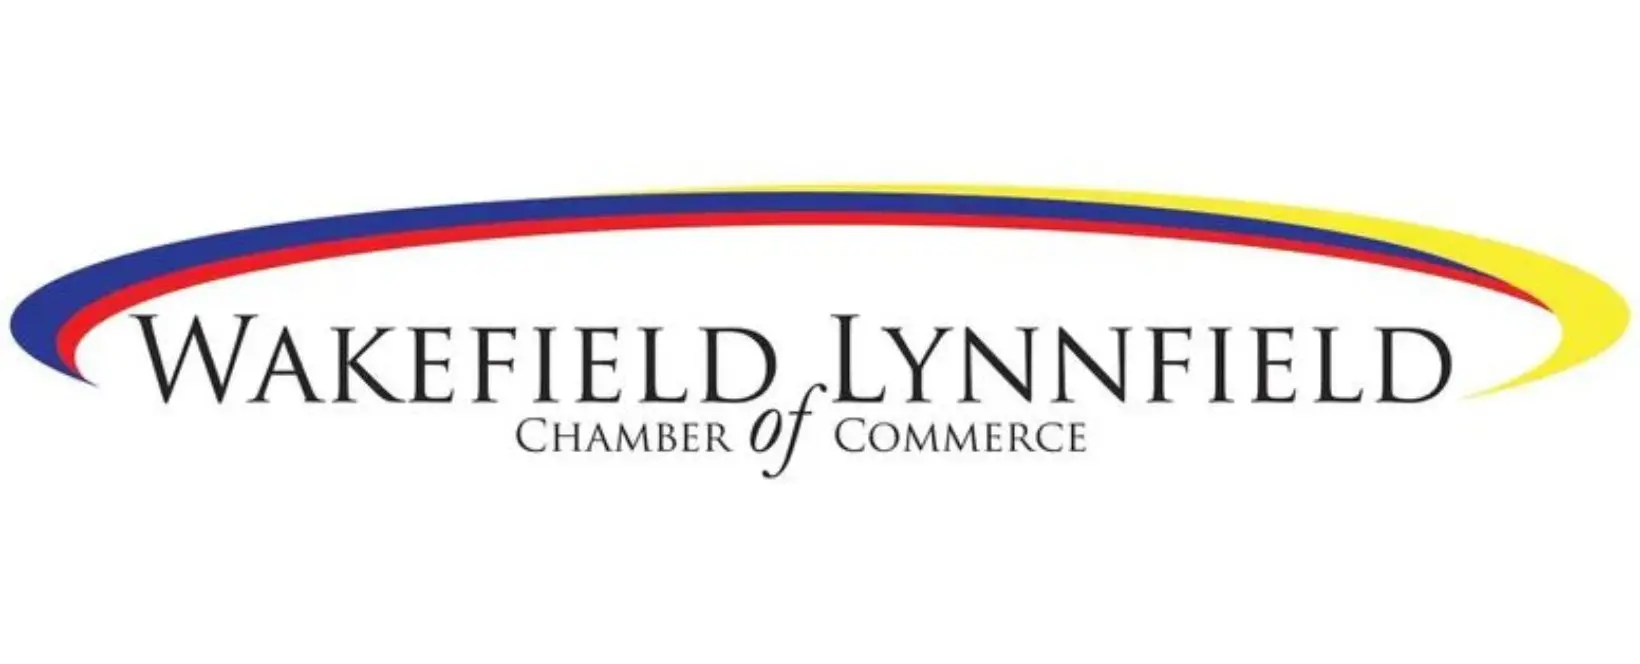 A logo for the fairfield lynne chamber of commerce.